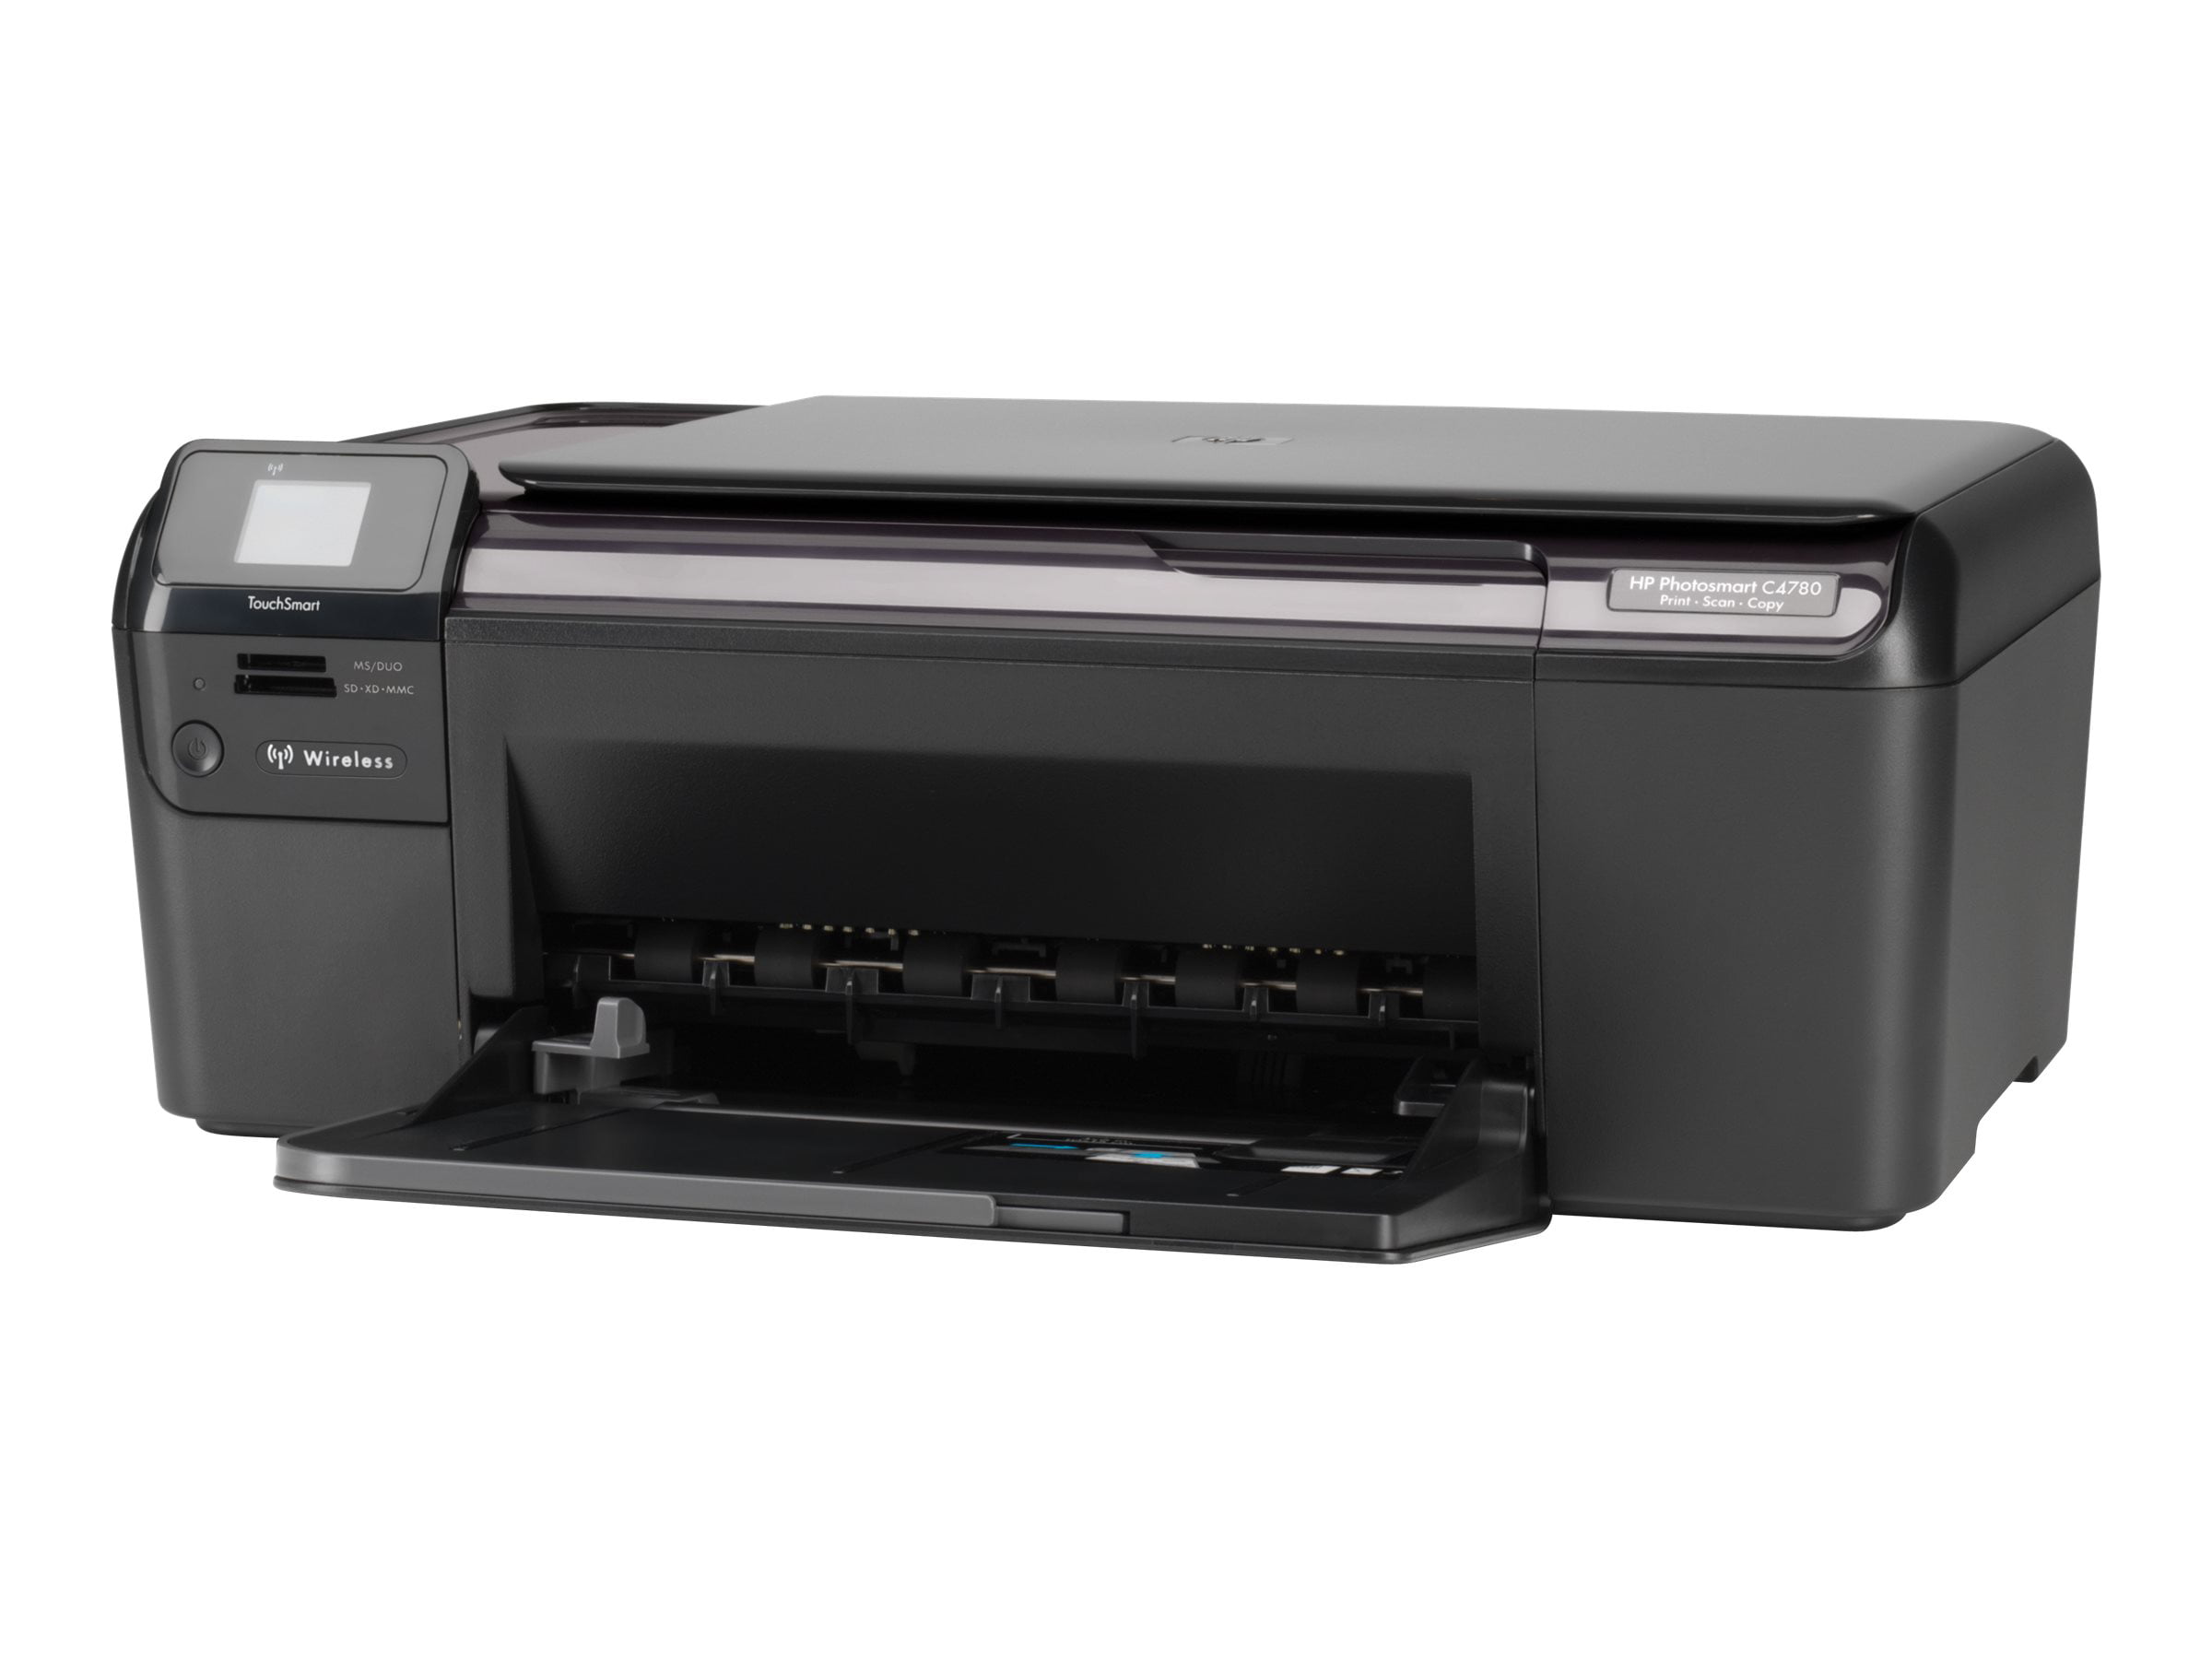 HP Photosmart C4780 All-in-One - Multifunction printer - color - ink-jet - Letter Size (8.5 in 11 (original) - 8.5 in x 30 in (media) - to 9